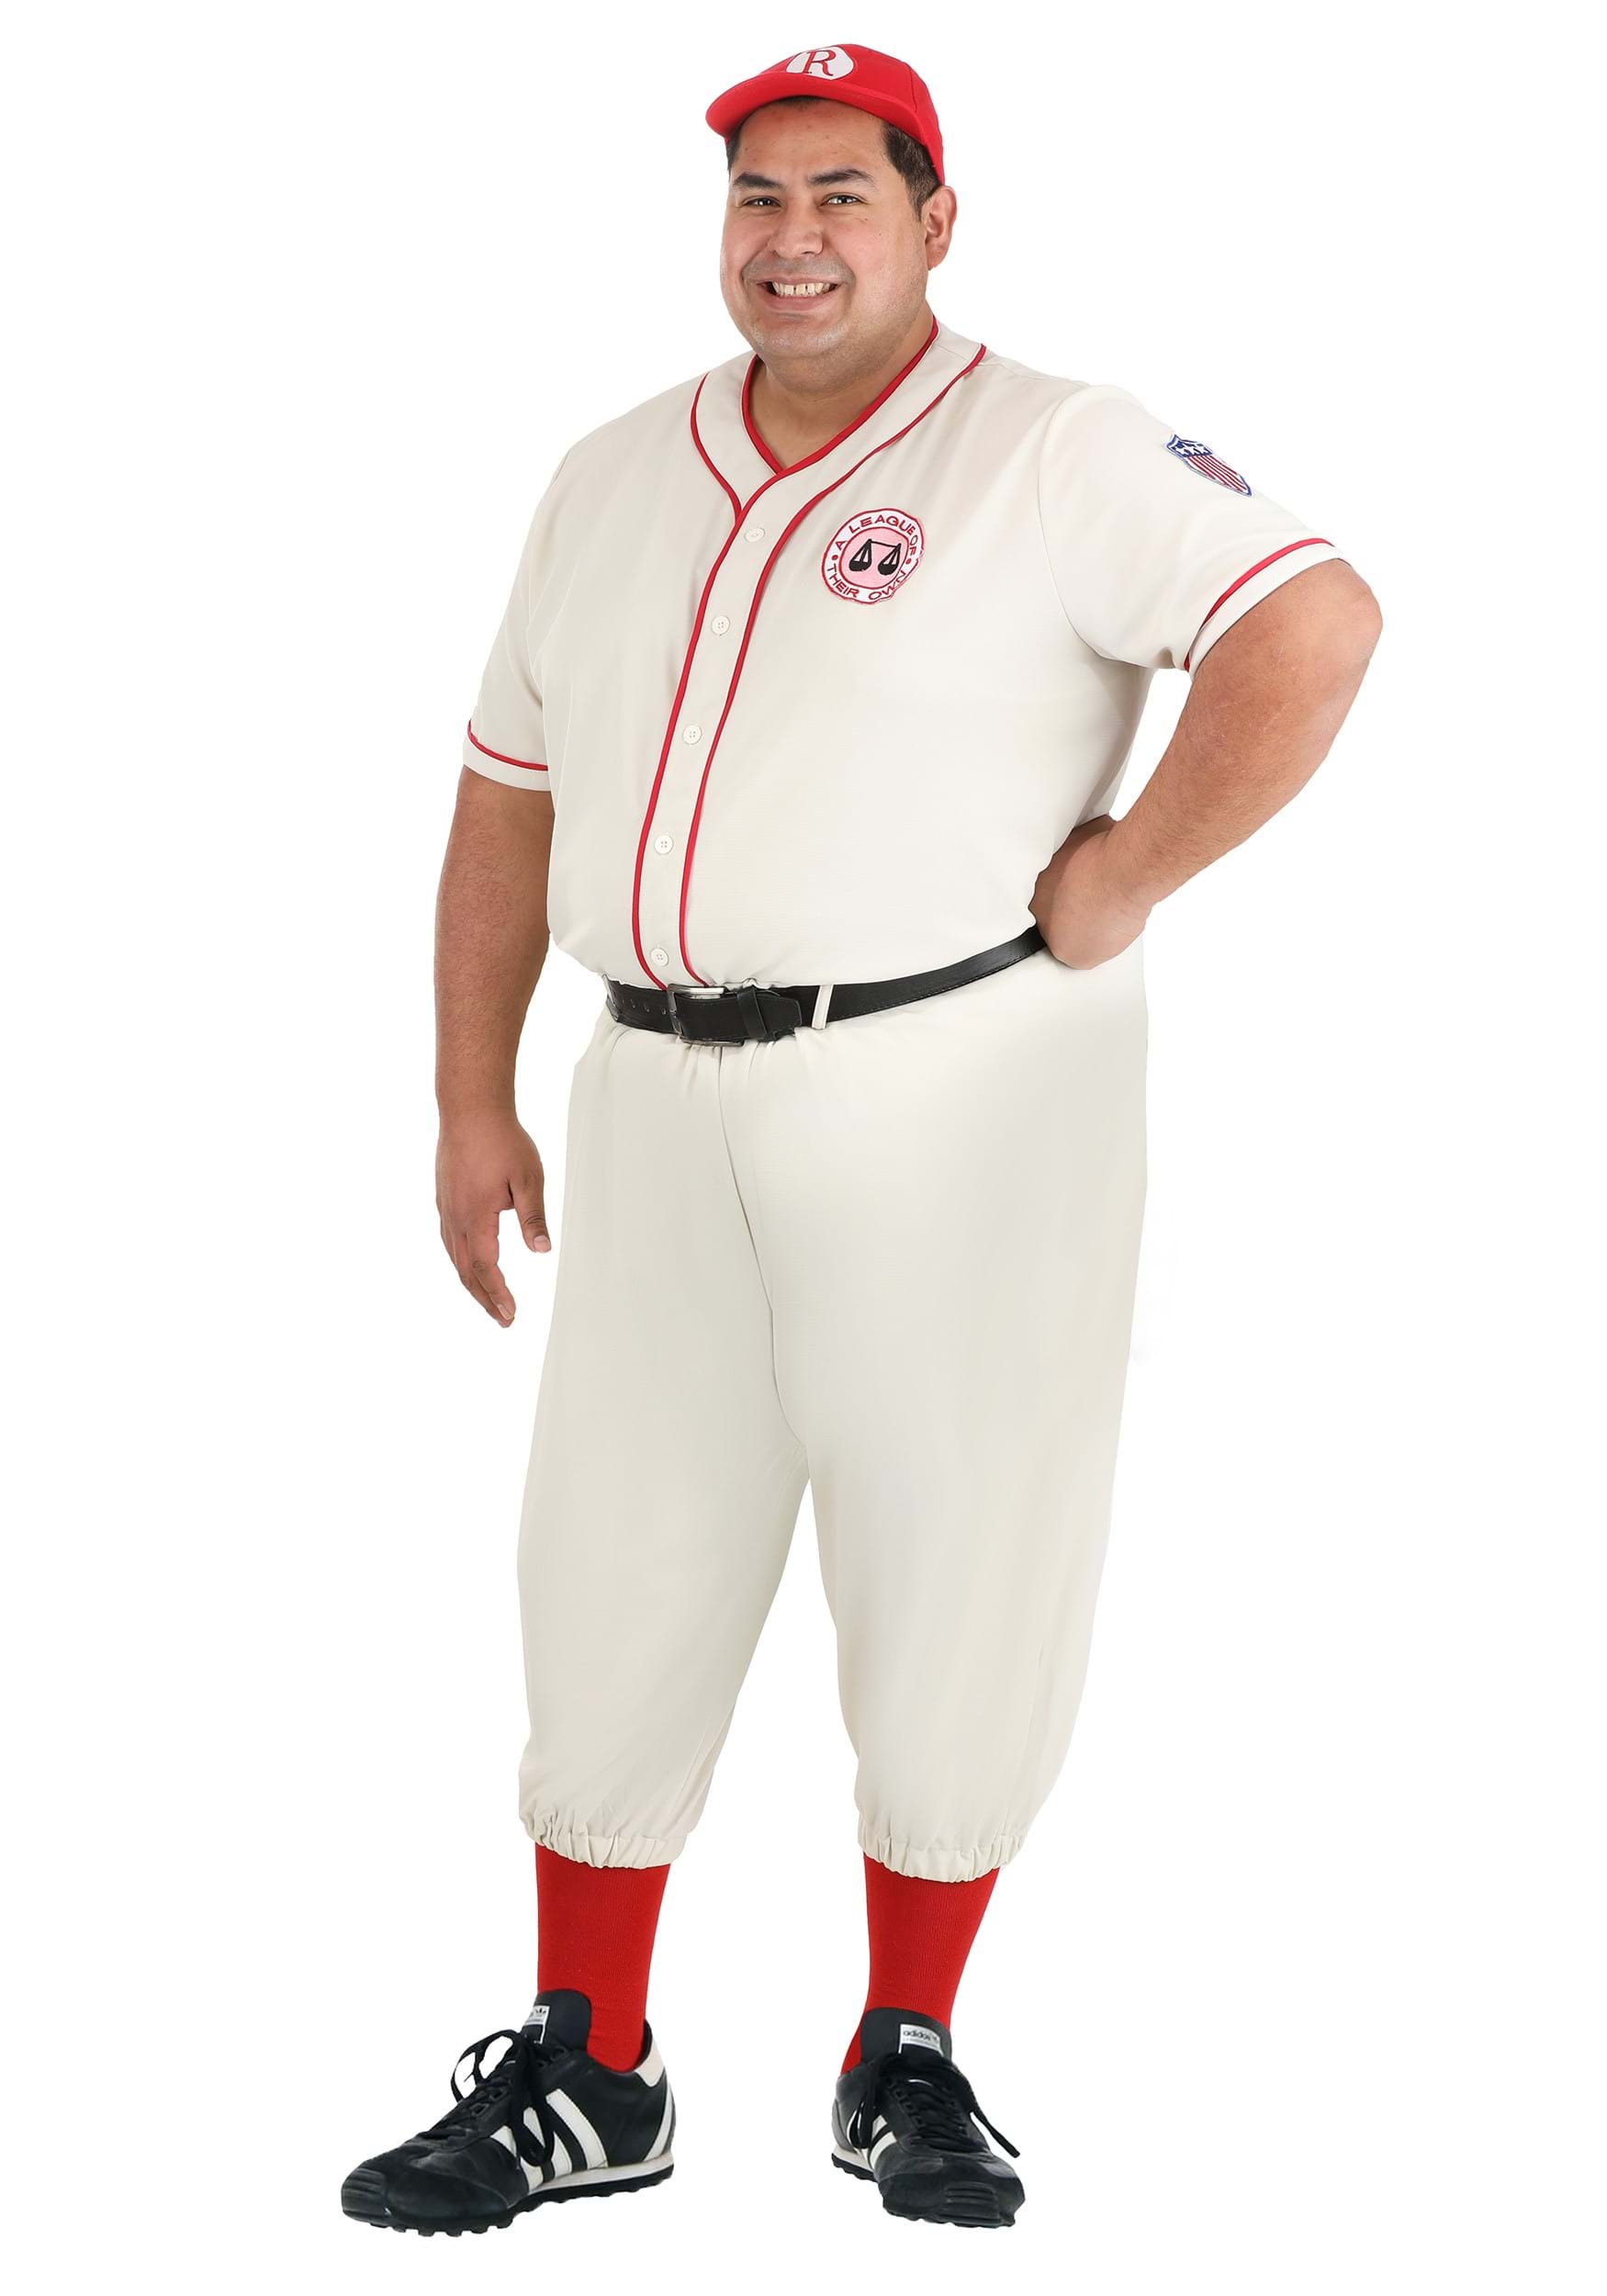 Photos - Fancy Dress League FUN Costumes Plus Size Coach Jimmy  Costume from A  of Th 